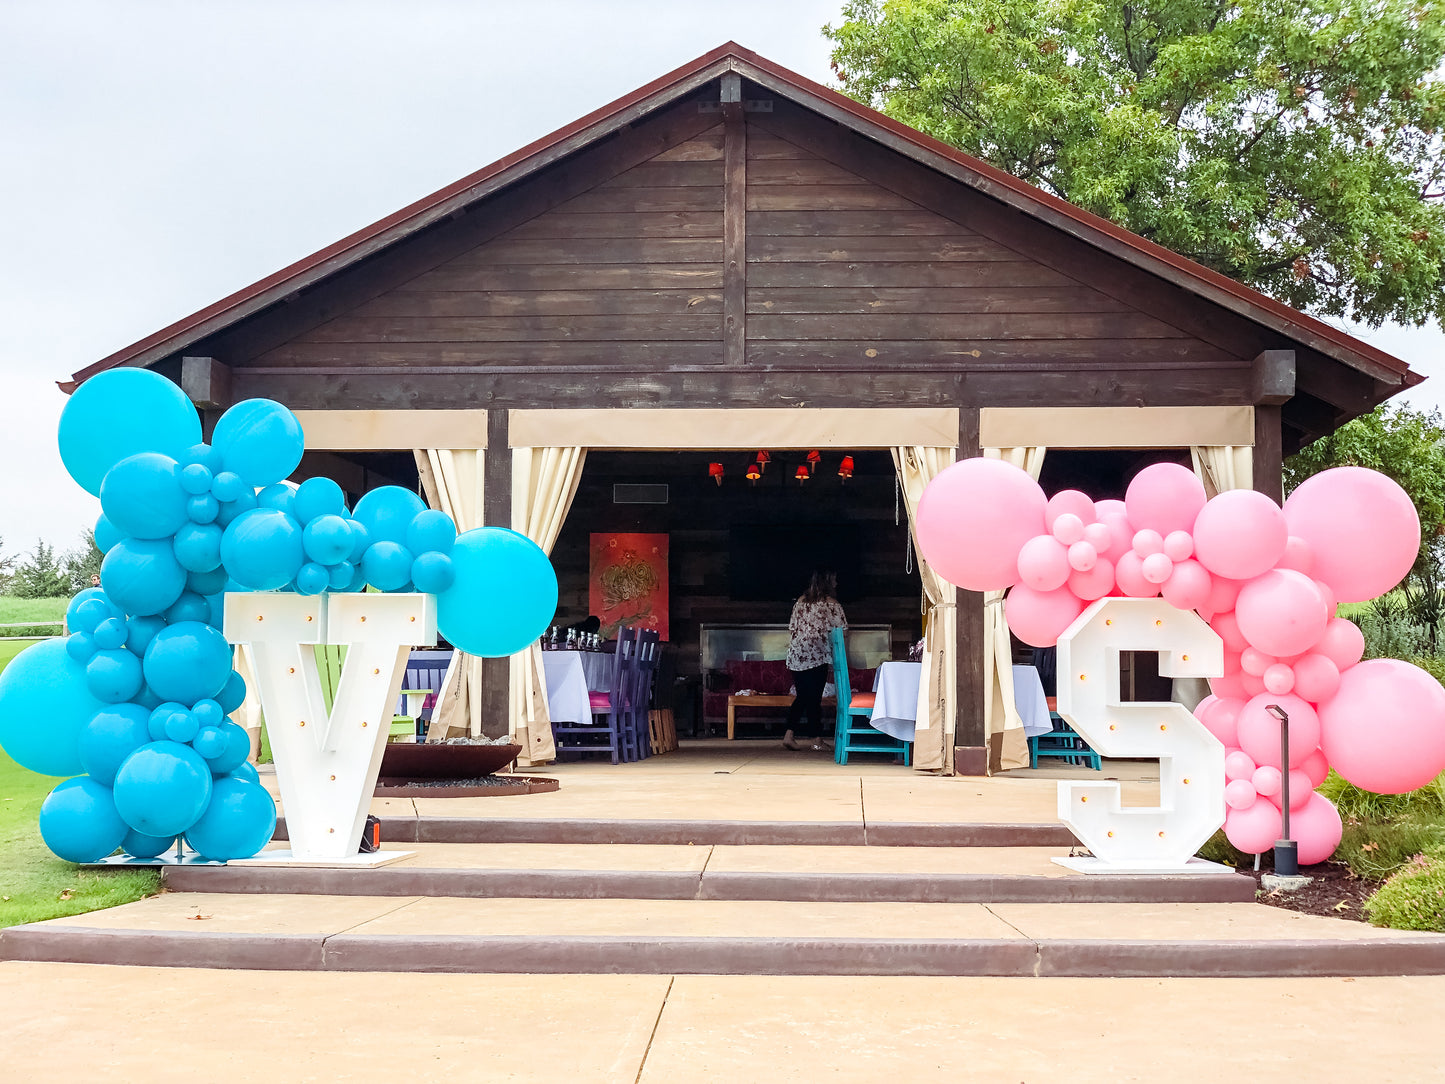 Yard or Indoor Marquee Letters with Balloons (DEPOSIT)